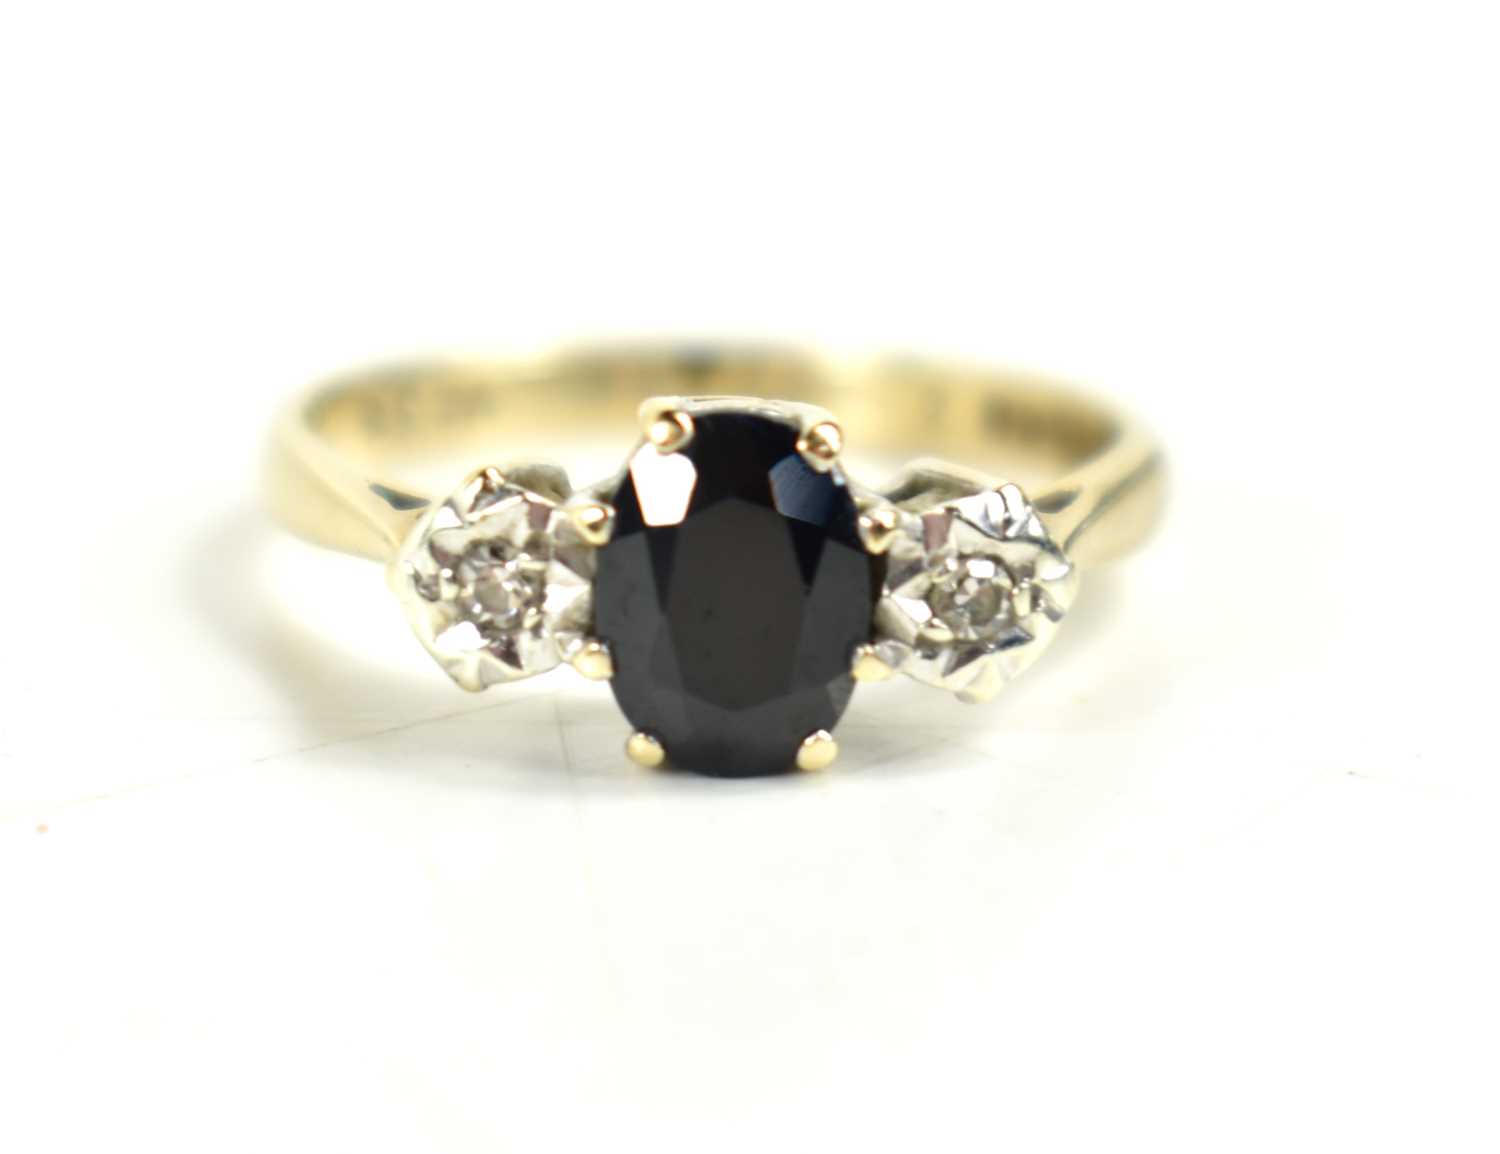 A 9ct gold, sapphire and diamond ring, the central oval cut sapphire of approximately 6.8 by 5.5mm